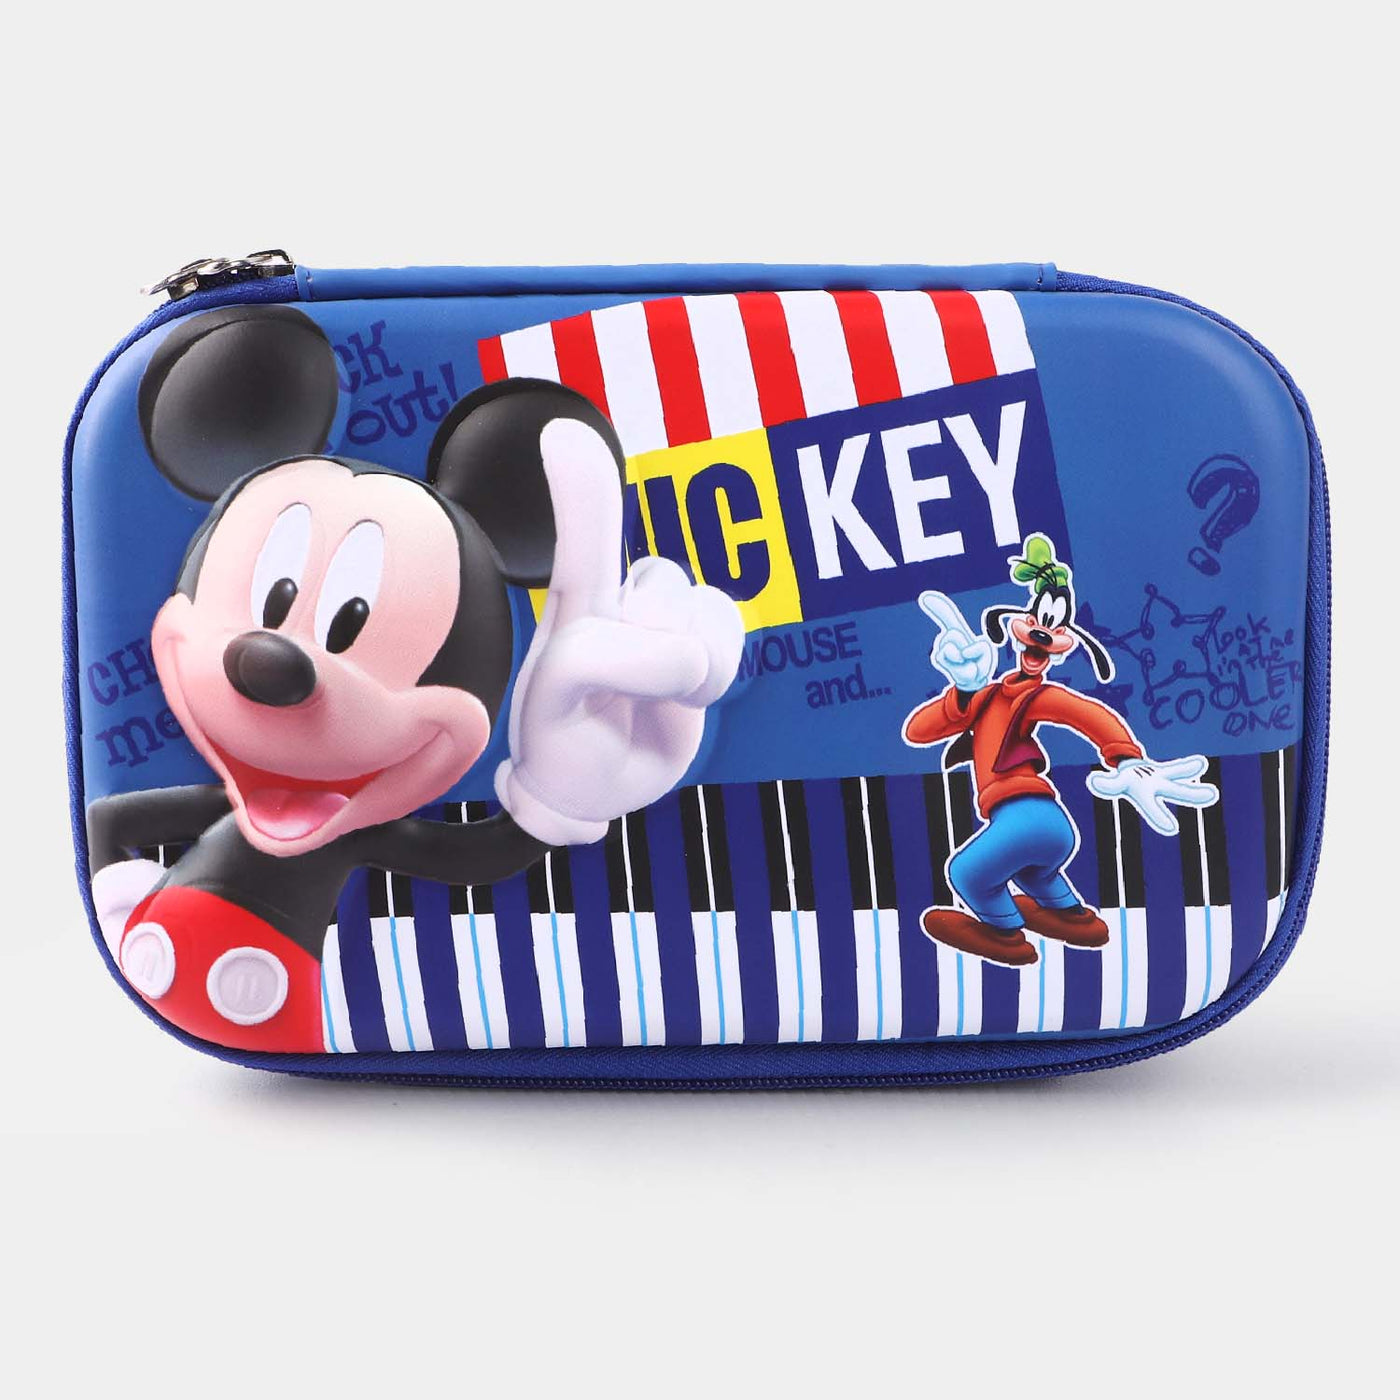 3D CHARACTER STATIONARY PENCIL POUCH FOR KIDS